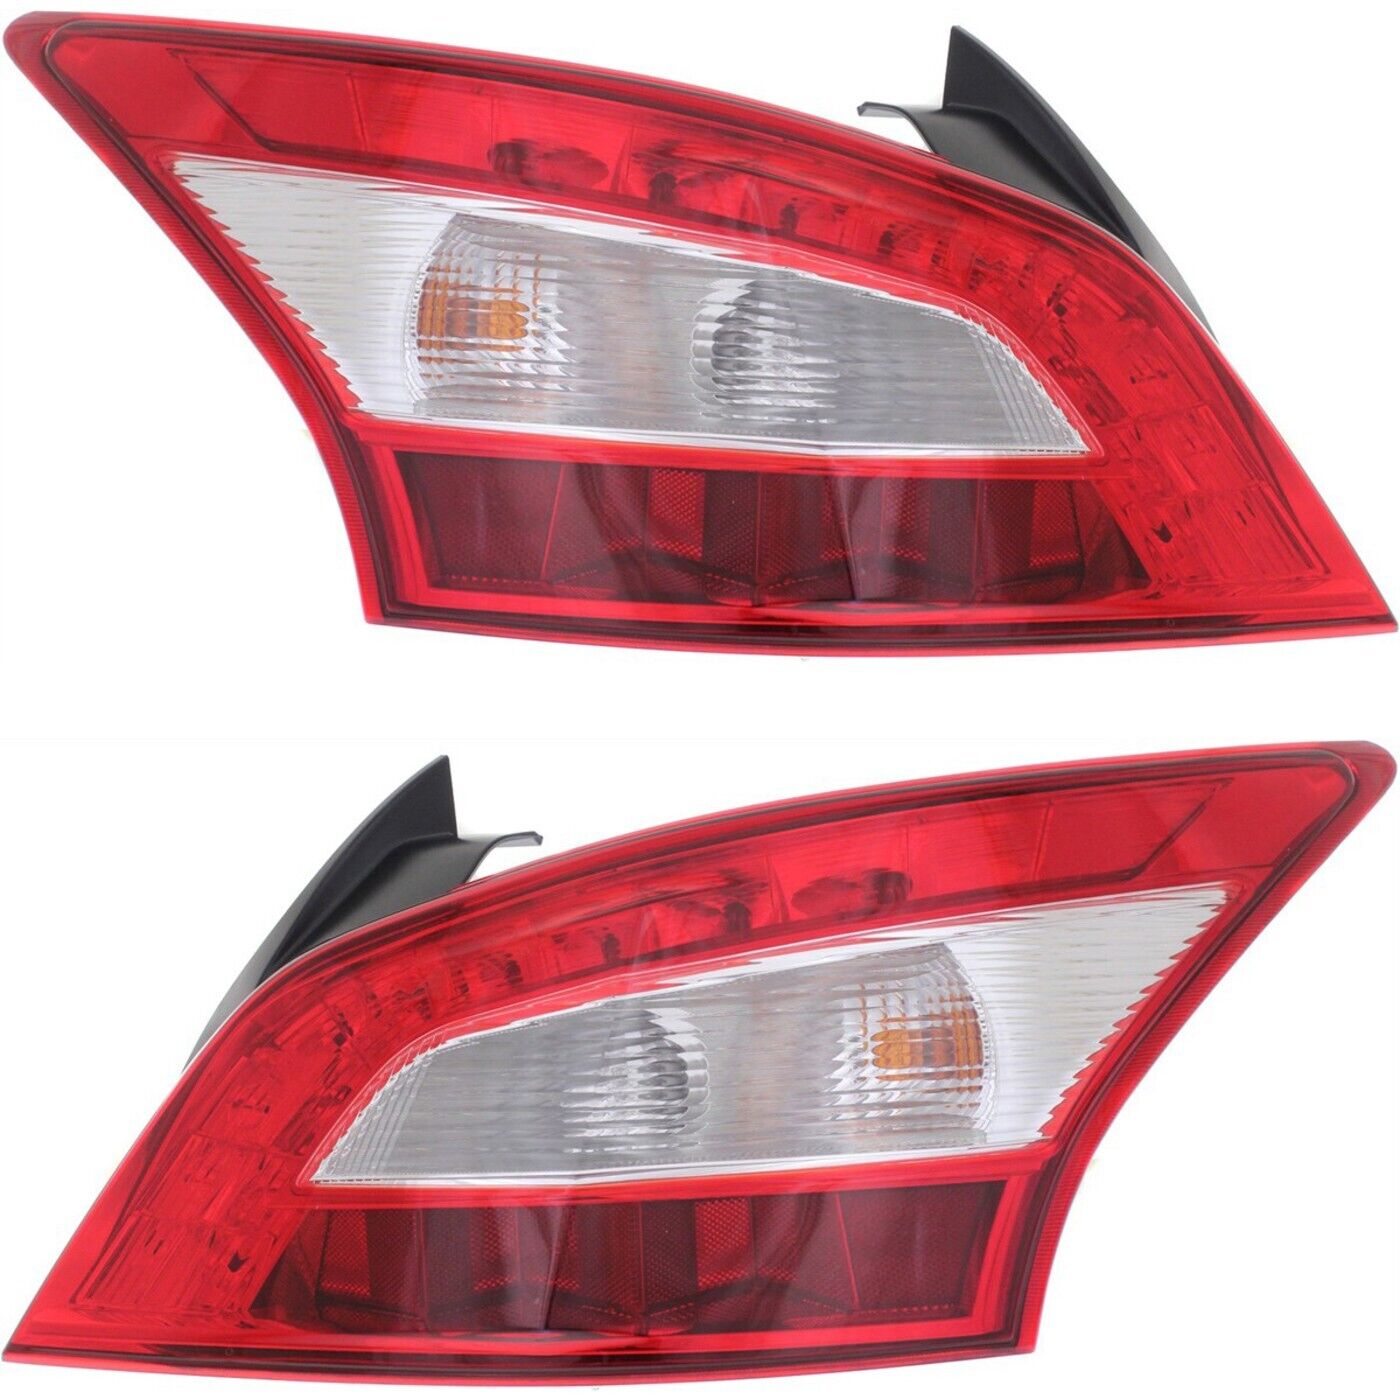 Set of 2 Tail Lights Taillights Taillamps Brakelights  Driver & Passenger Pair